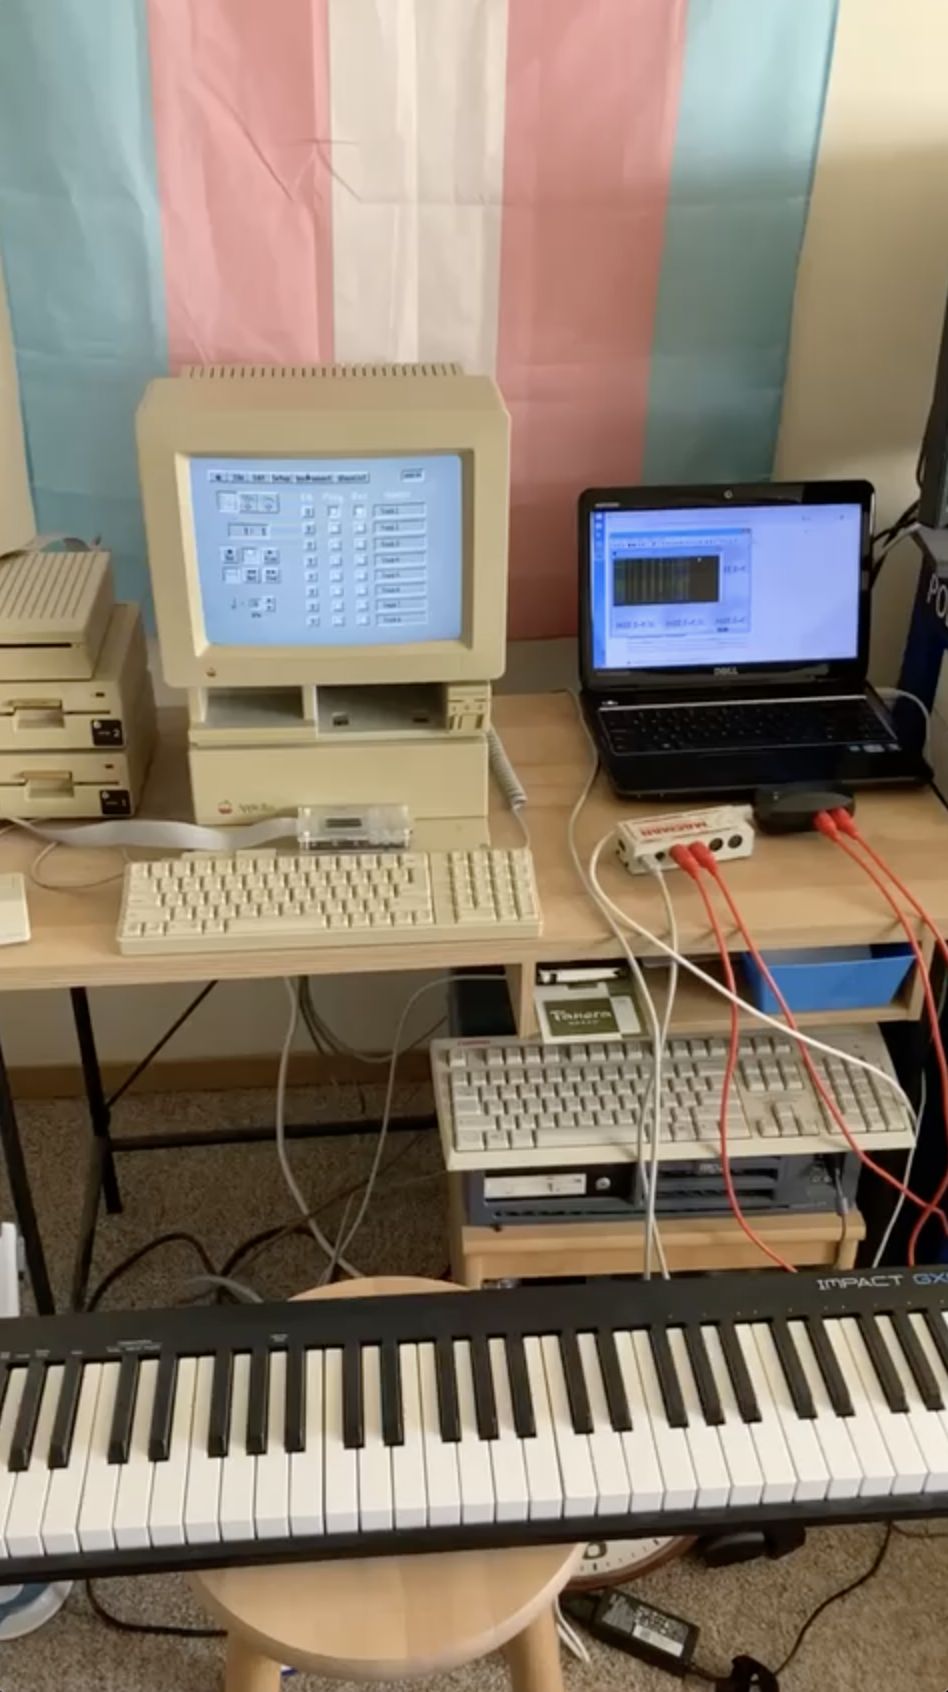 A photo showing an Apple IIGS running synthLAB, a Midiman Macman, a M-Audio Midisport 1x1, and a laptop running MIDI-OX